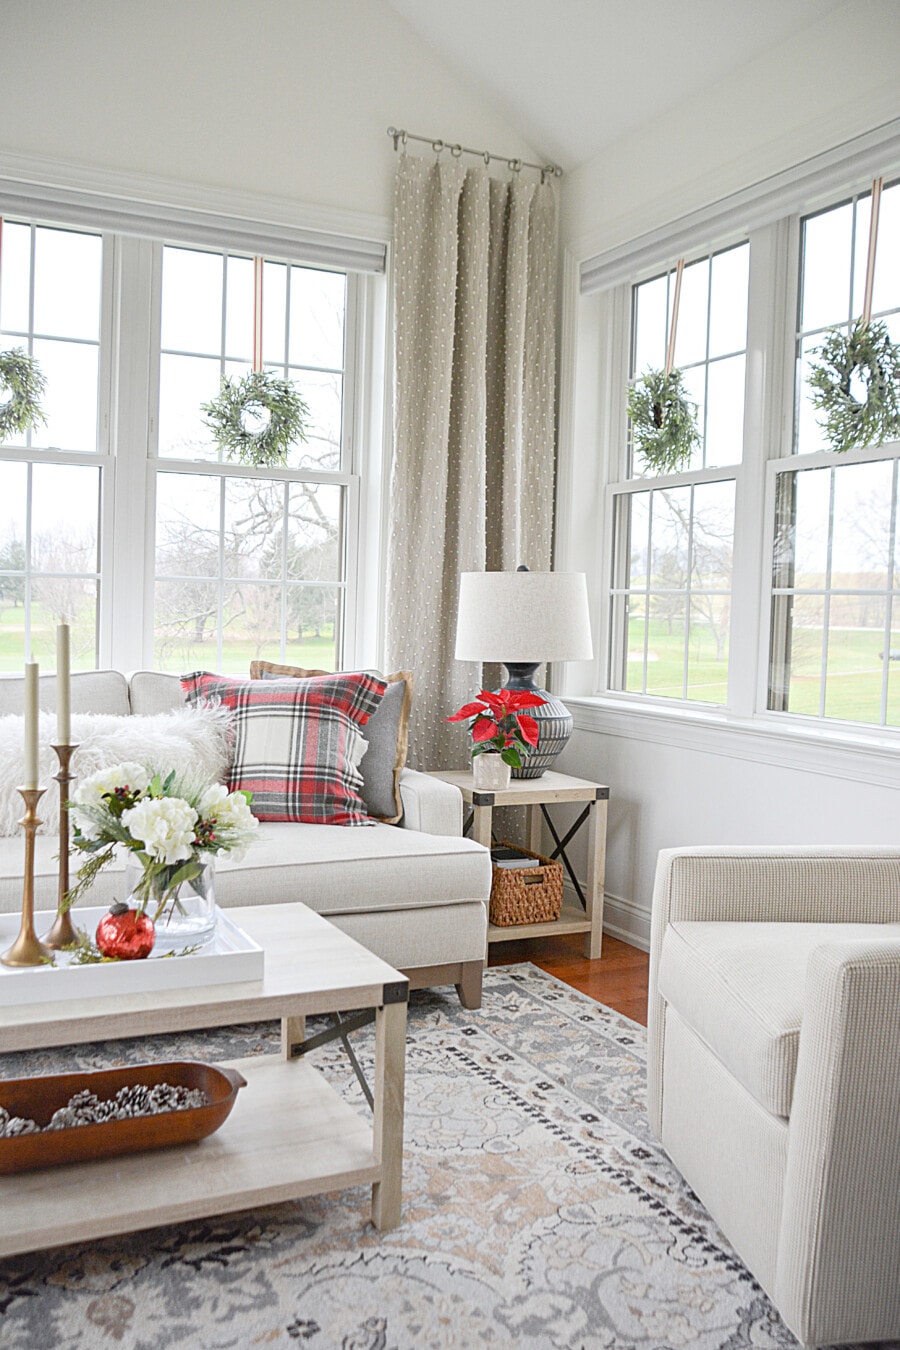 TIPS FOR DECORATING SMALL SPACES FOR CHRISTMAS